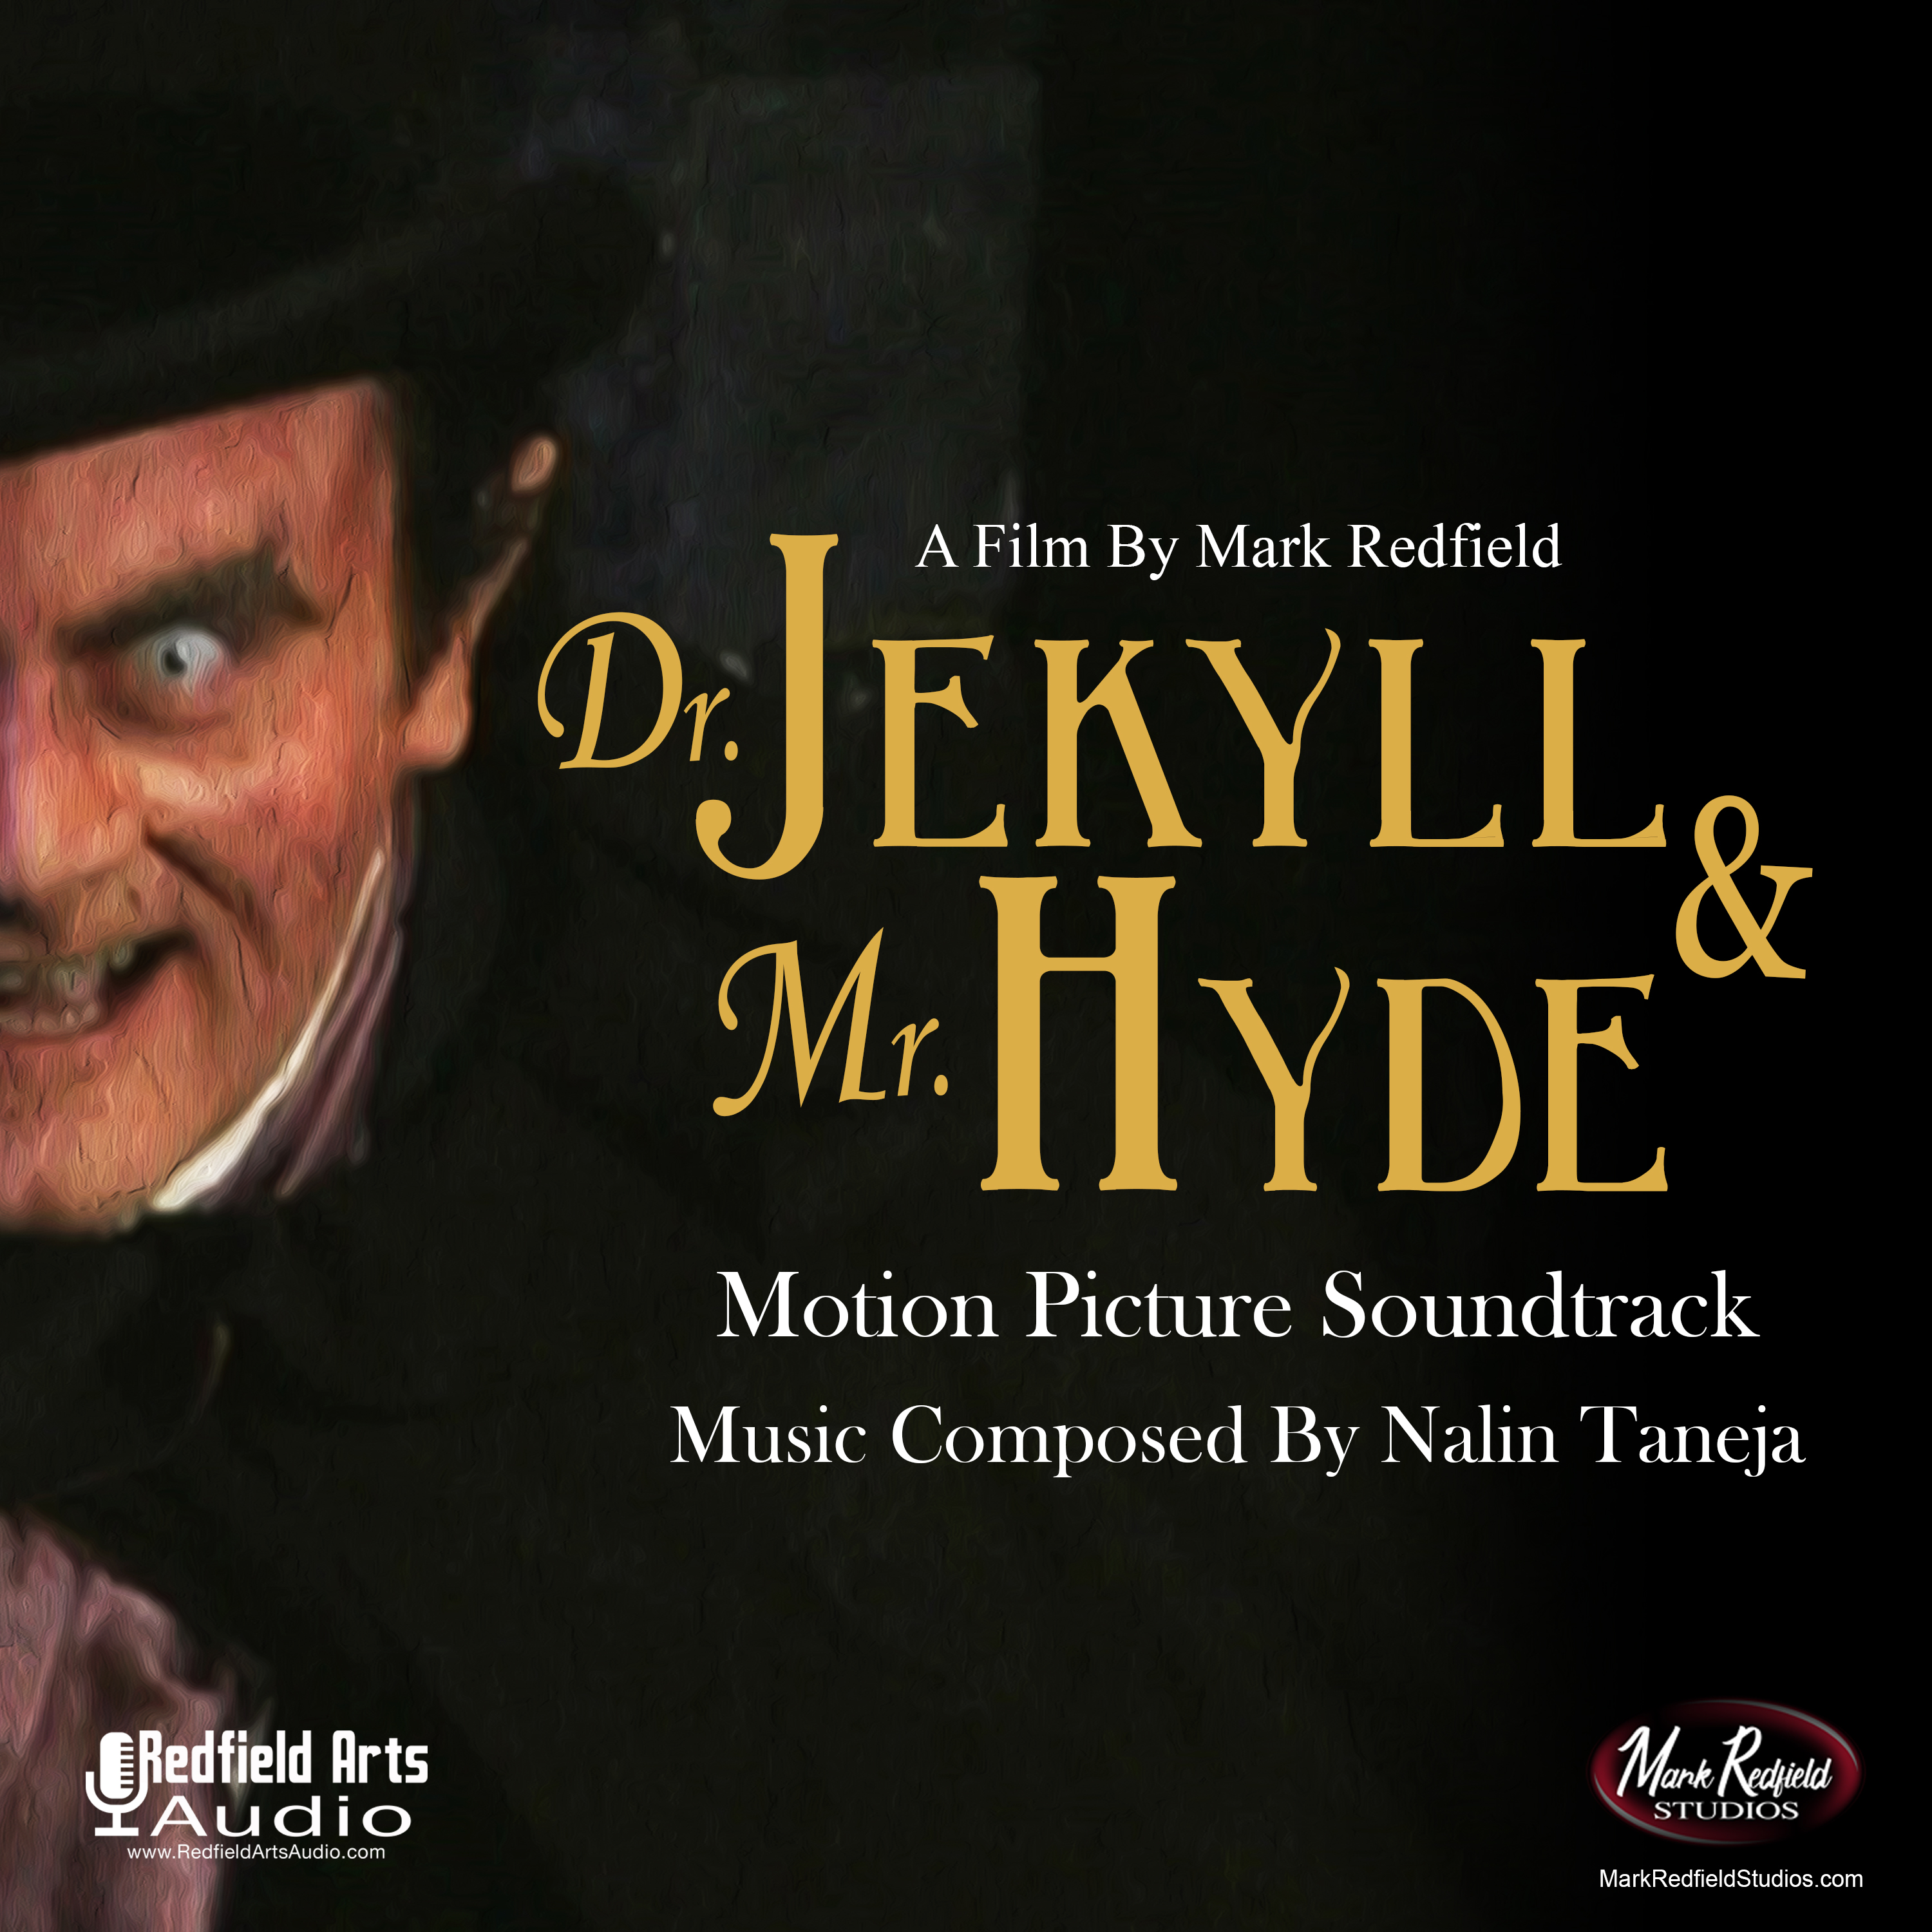 Dr. Jekyll & Mr. Hyde Motion Picture Soundtrack